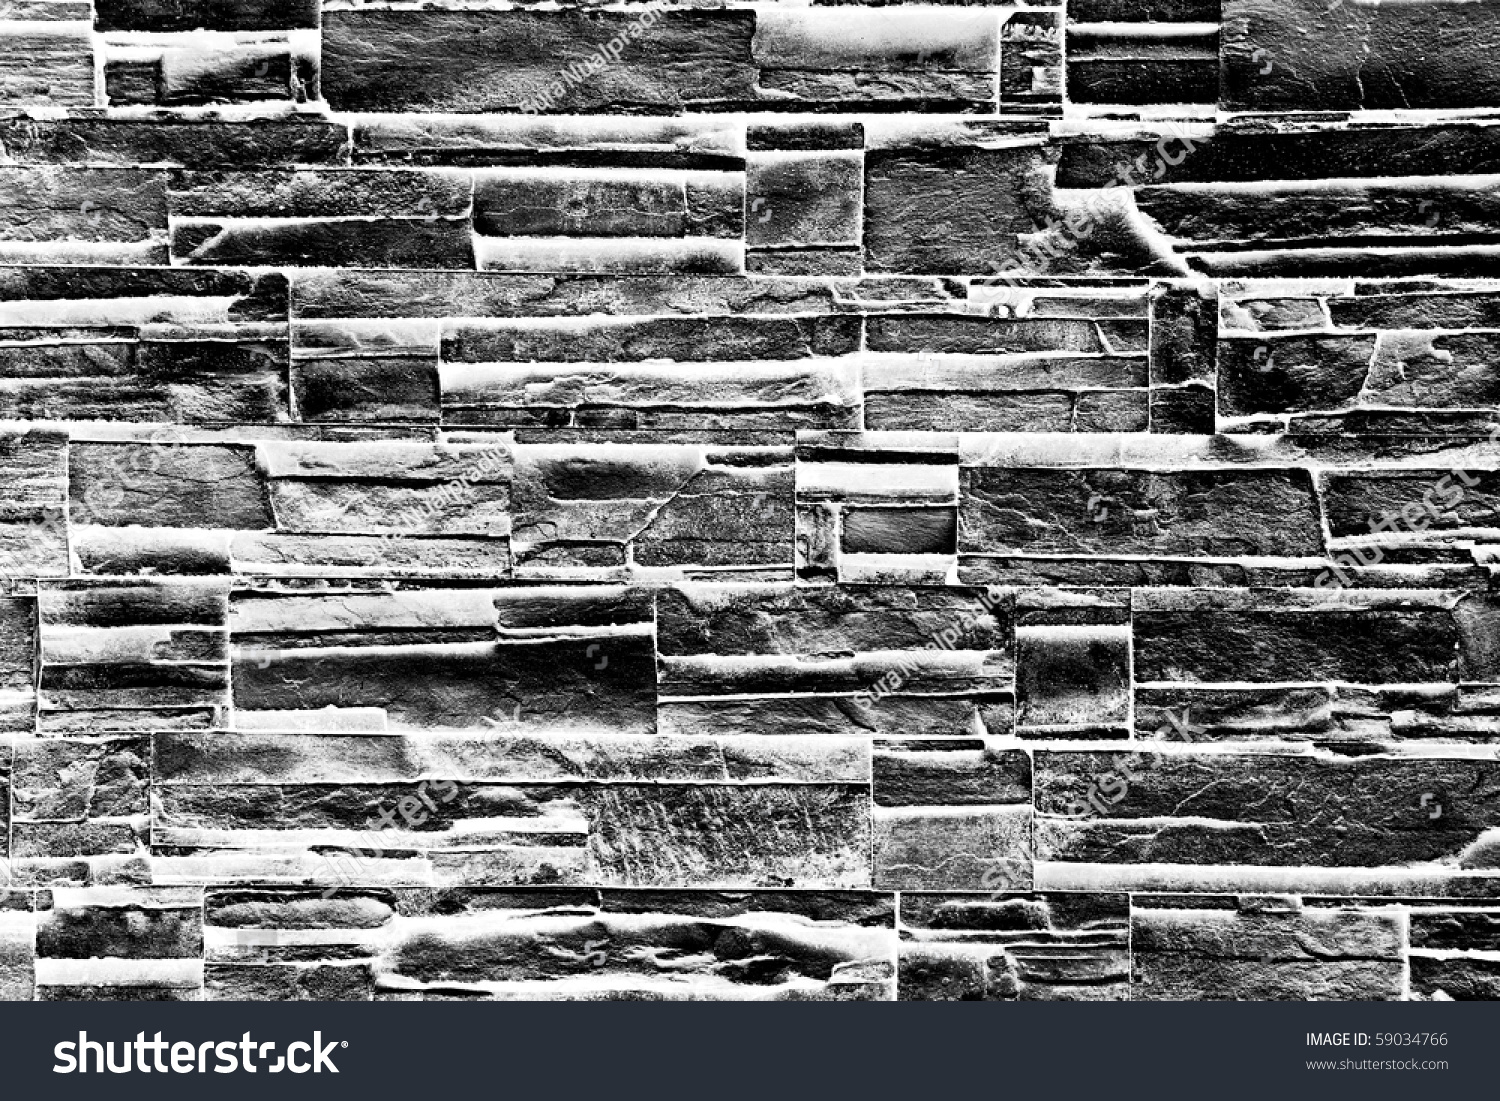 Brick Wall Texture In Black And White Stock Photo 59034766 : Shutterstock